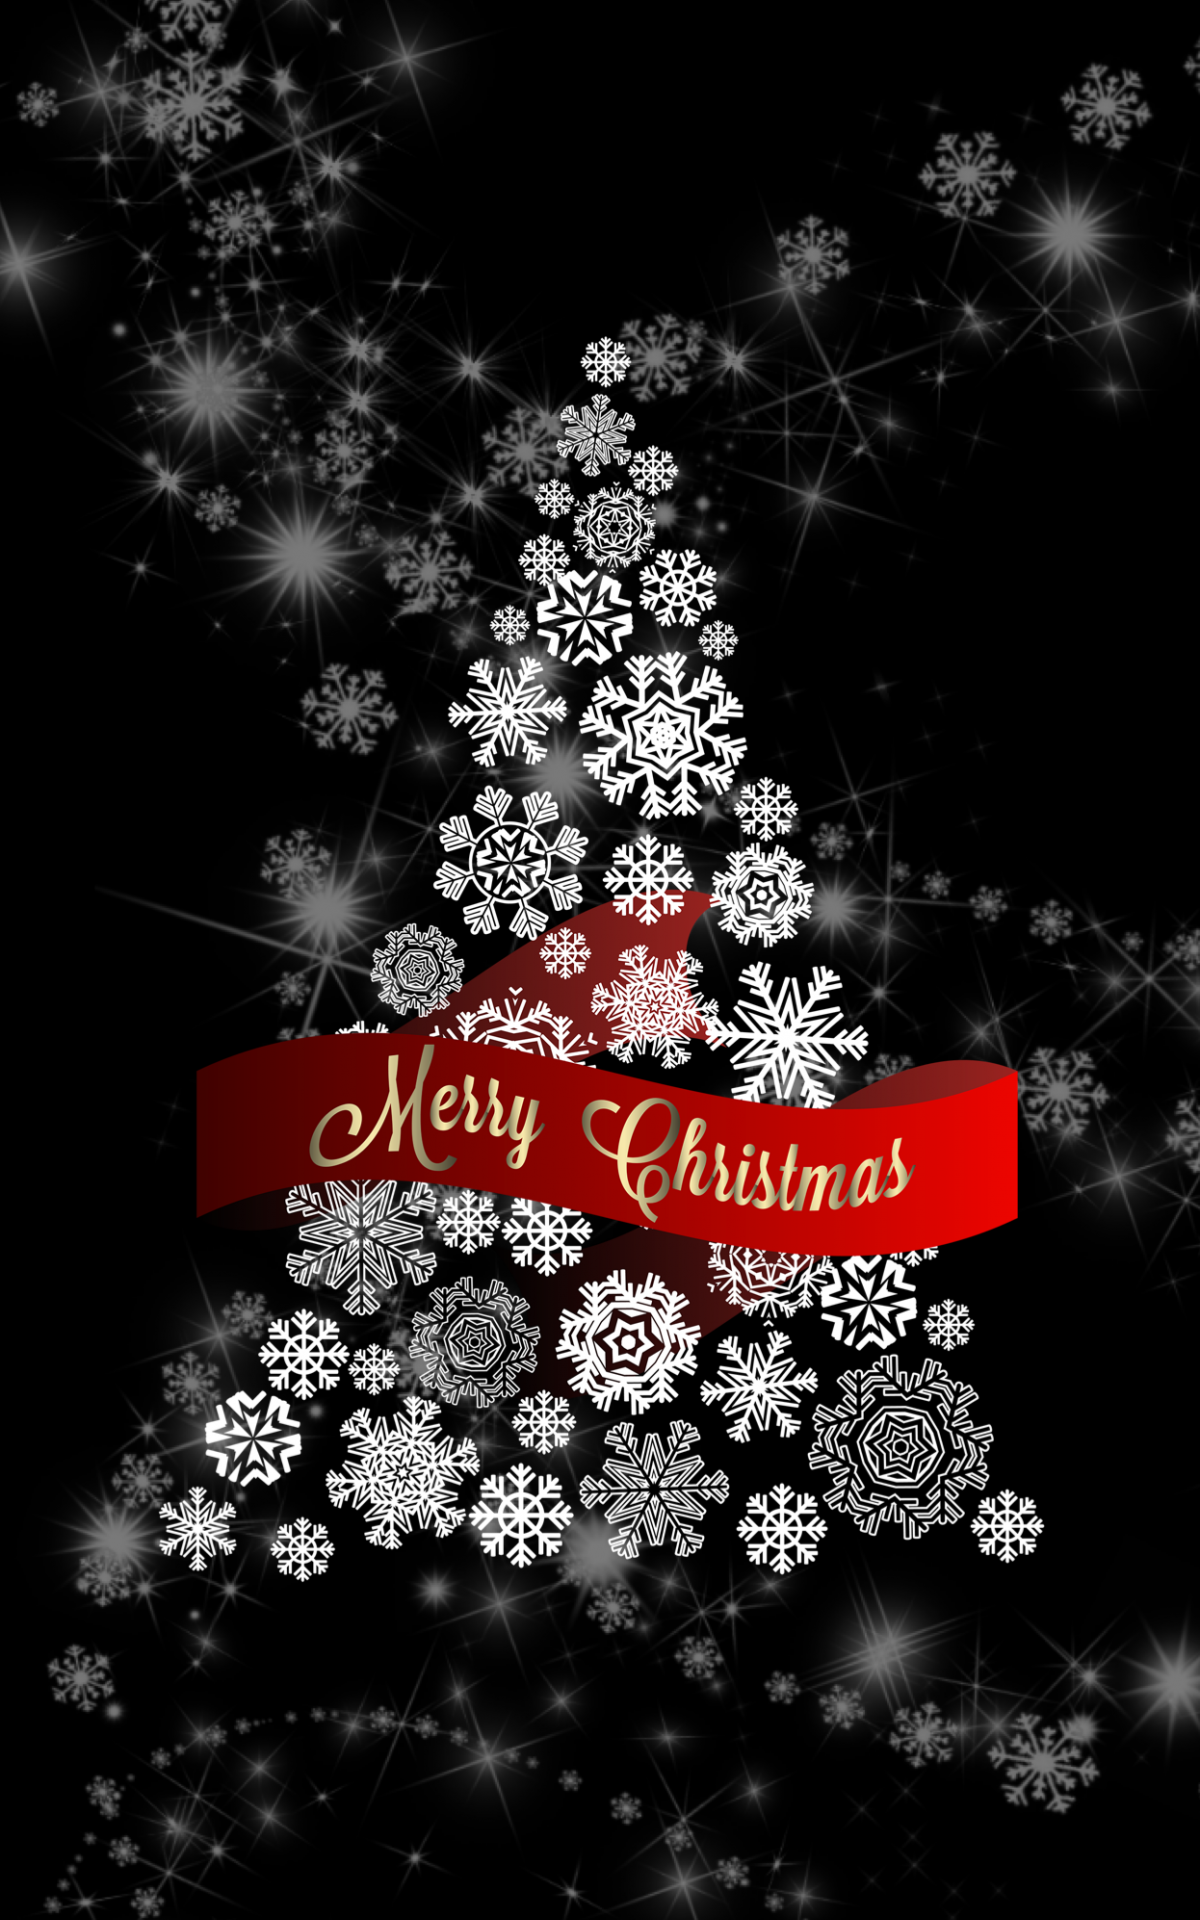 Free download iPhone XS Max Christmas tree in 2019 iPhone wallpaper Neon [1246x2688] for your Desktop, Mobile & Tablet. Explore Christmas 2019 Wallpaper. Christmas 2019 Wallpaper, Christmas Card 2019 Wallpaper, Merry Christmas 2019 Wallpaper